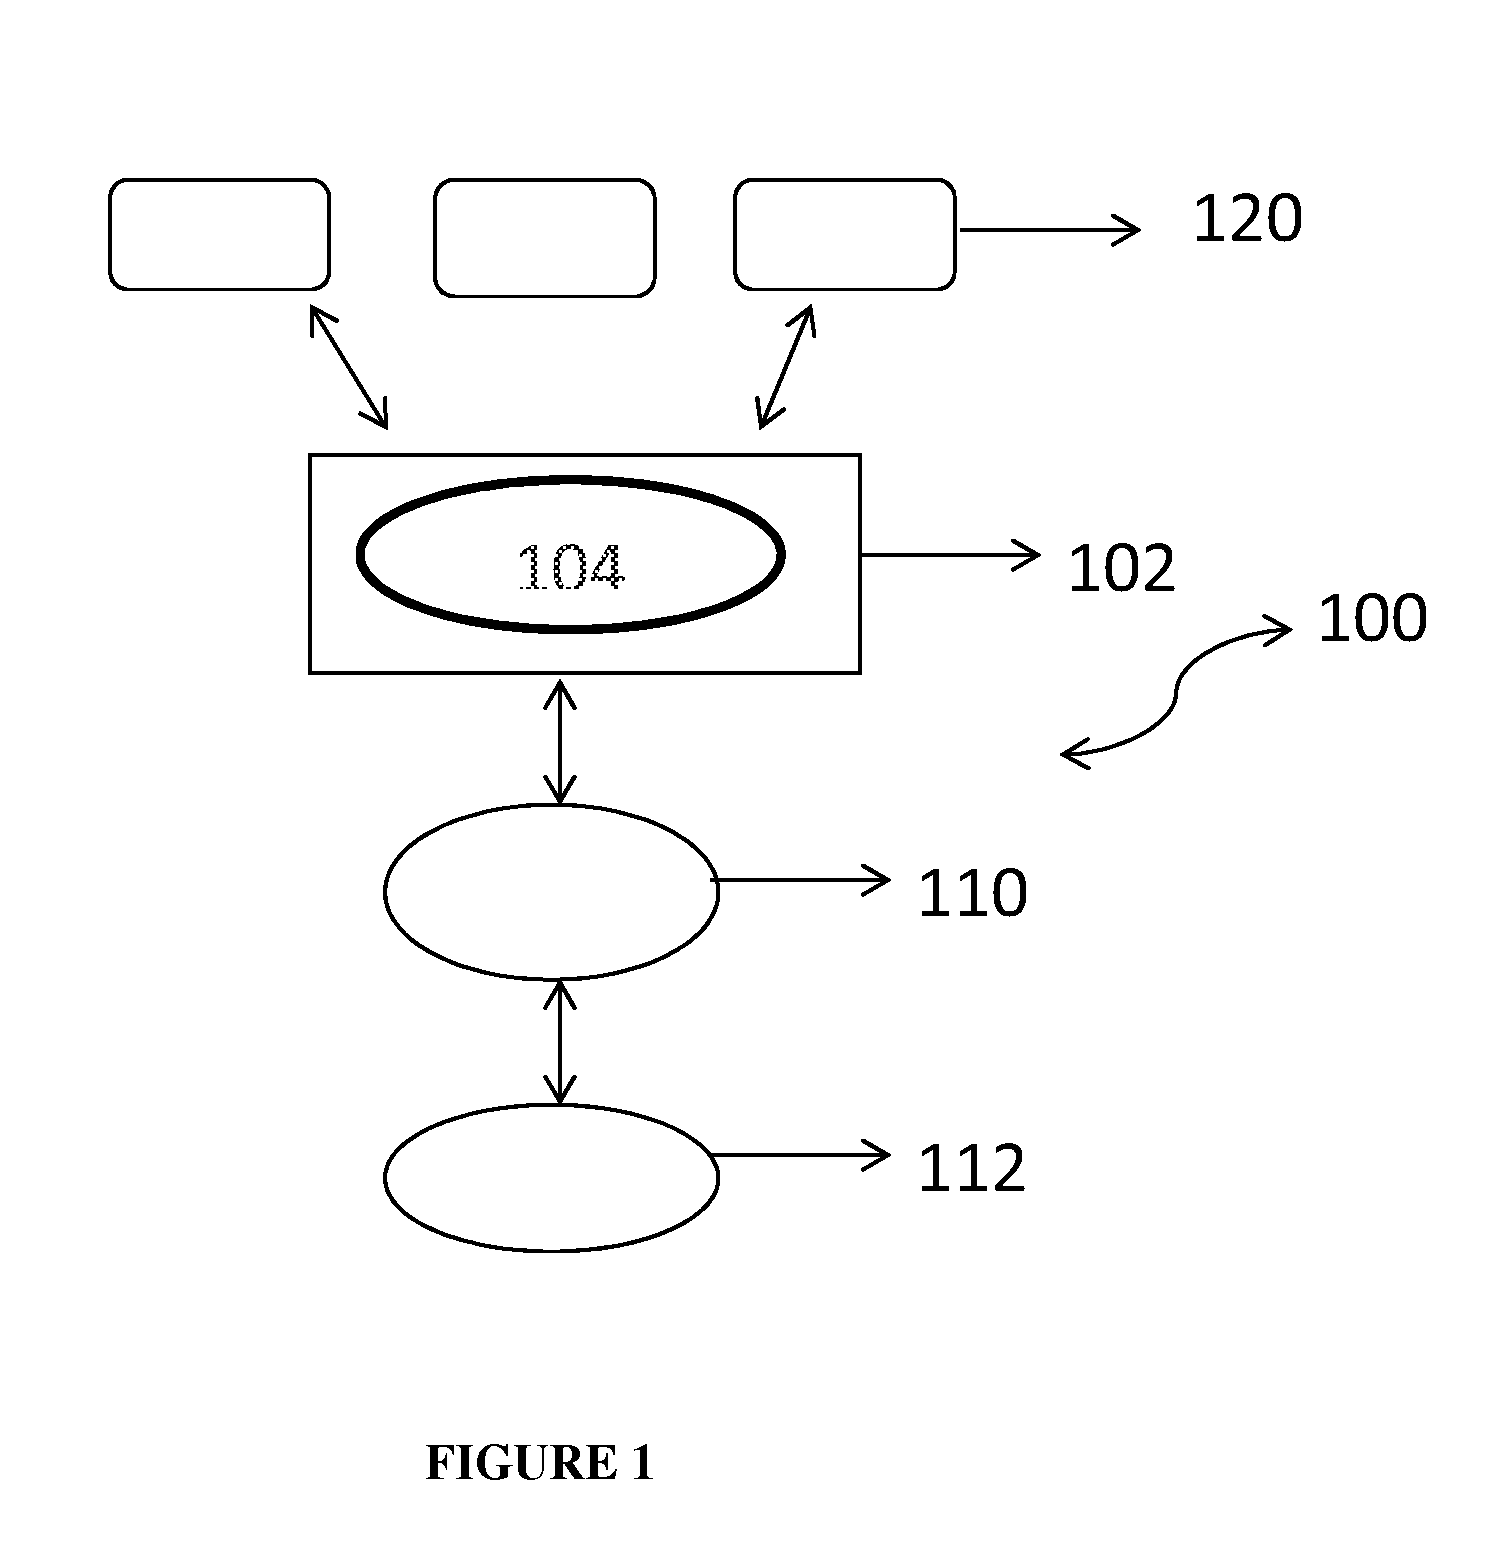 Generic Device Attributes for Sensing Devices